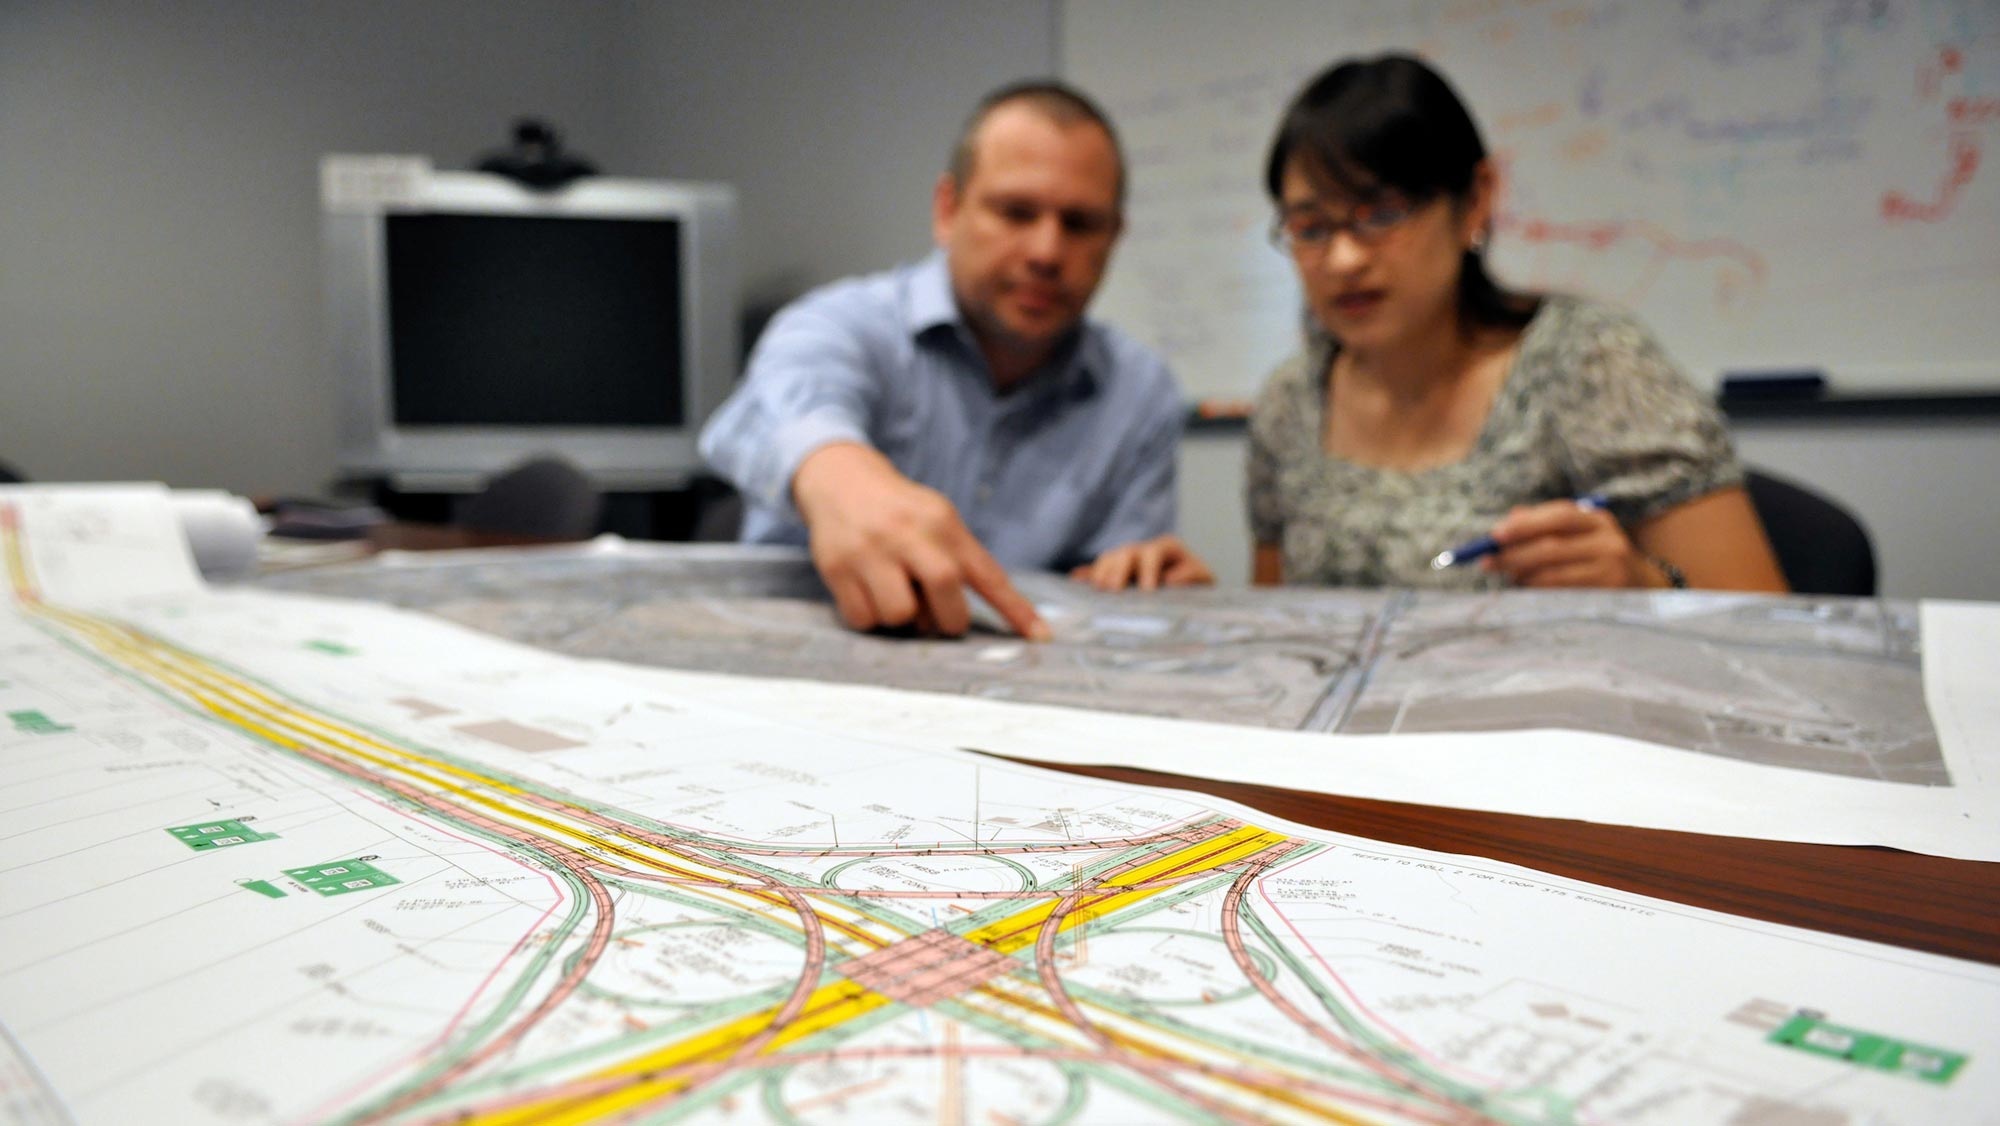 A woman with short black hair and glasses looks on as a man with a long-sleeved, blue button-down shirt points to something on the maps splayed across the table before them.